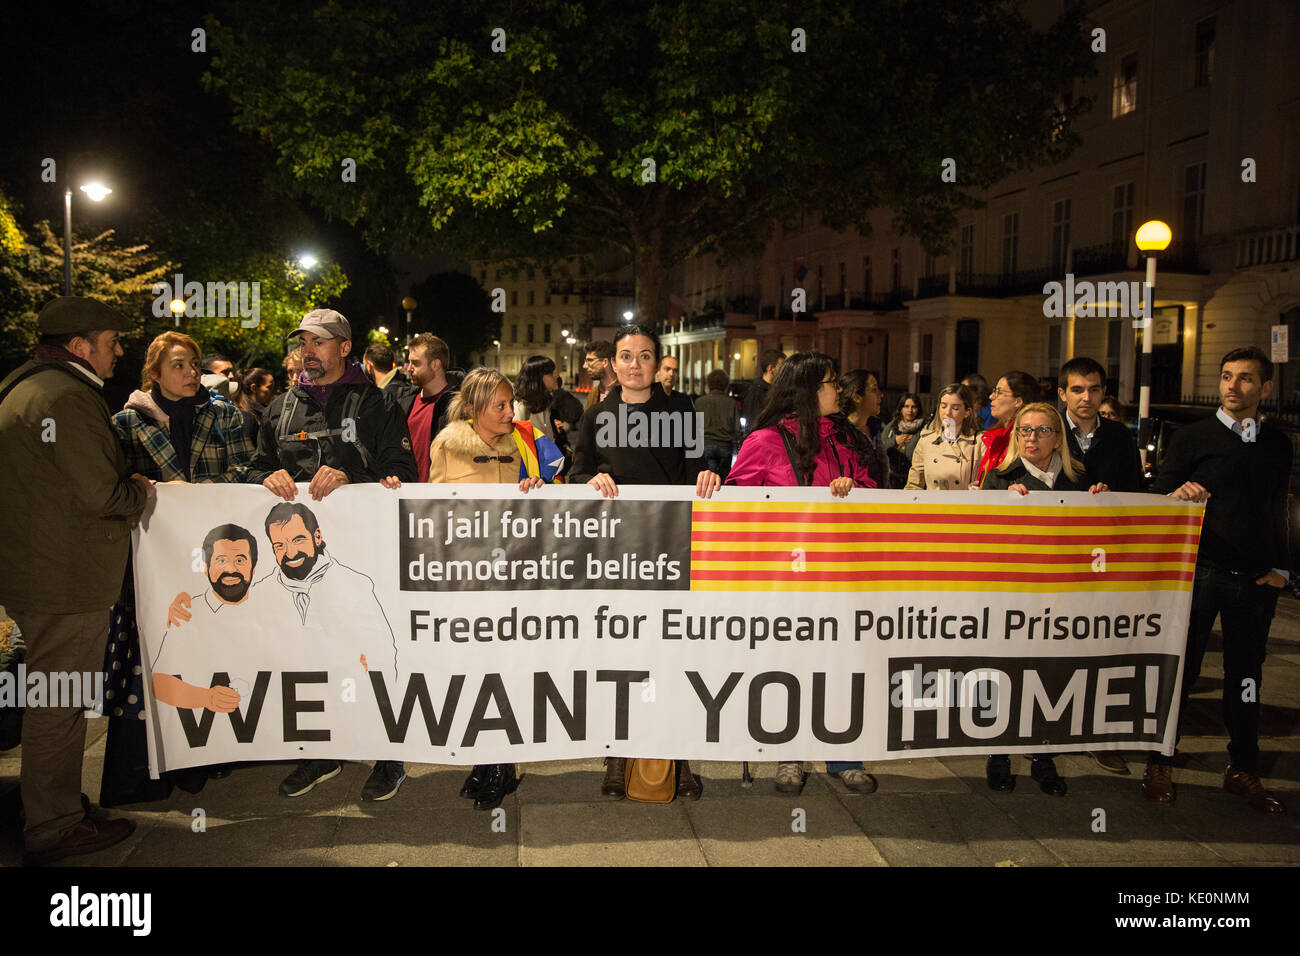 London, UK. 17th October, 2017. Catalans protest outside the Spanish embassy in Belgrave Square against the arrests and jailing yesterday of Jordi Cuixart and Jordi Sànchez, leaders of the Catalan National Assembly (ANC) and independence group Omnium by the Spanish authorities. Spain's High Court has ordered that the pair be held without bail pending an investigation for alleged sedition. Credit: Mark Kerrison/Alamy Live News Stock Photo